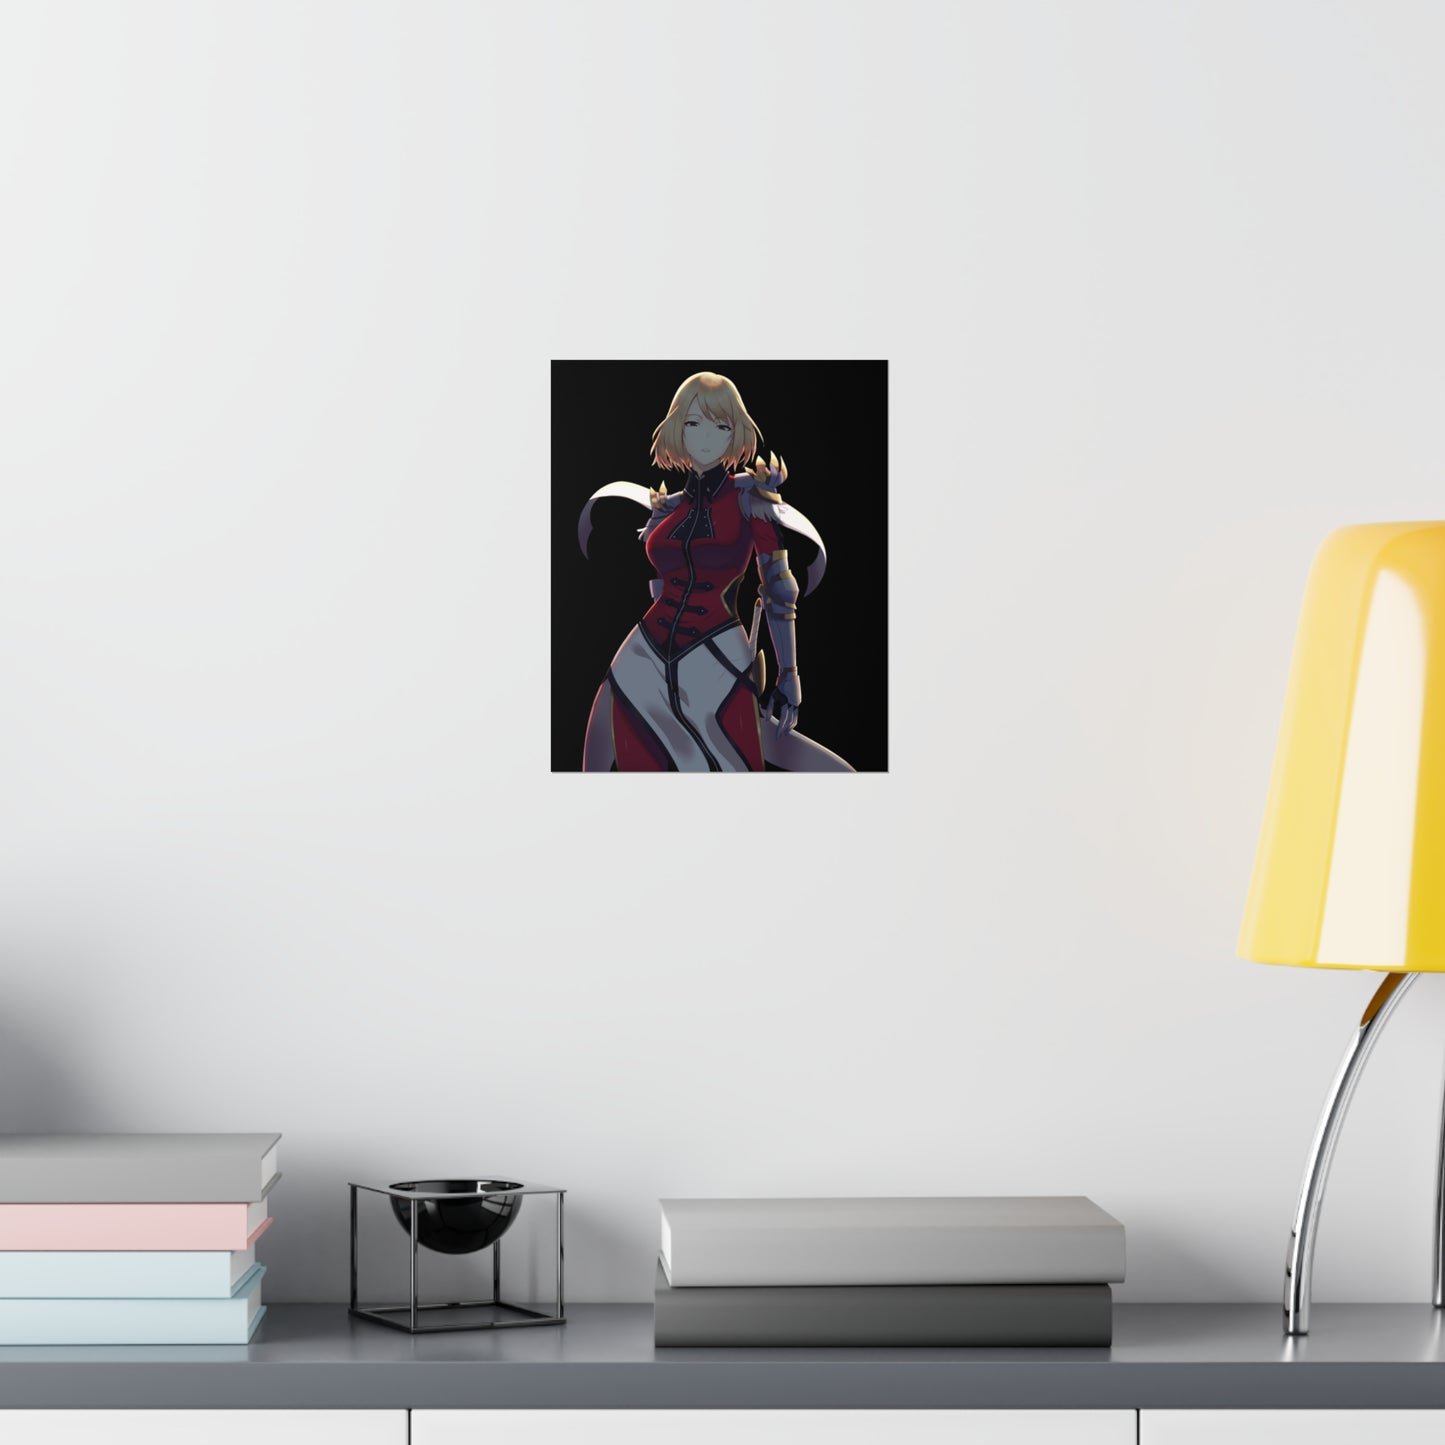 Cha Hae In Solo Leveling Poster - Premium Matte Vertical Poster - Anime Wall Art Decor